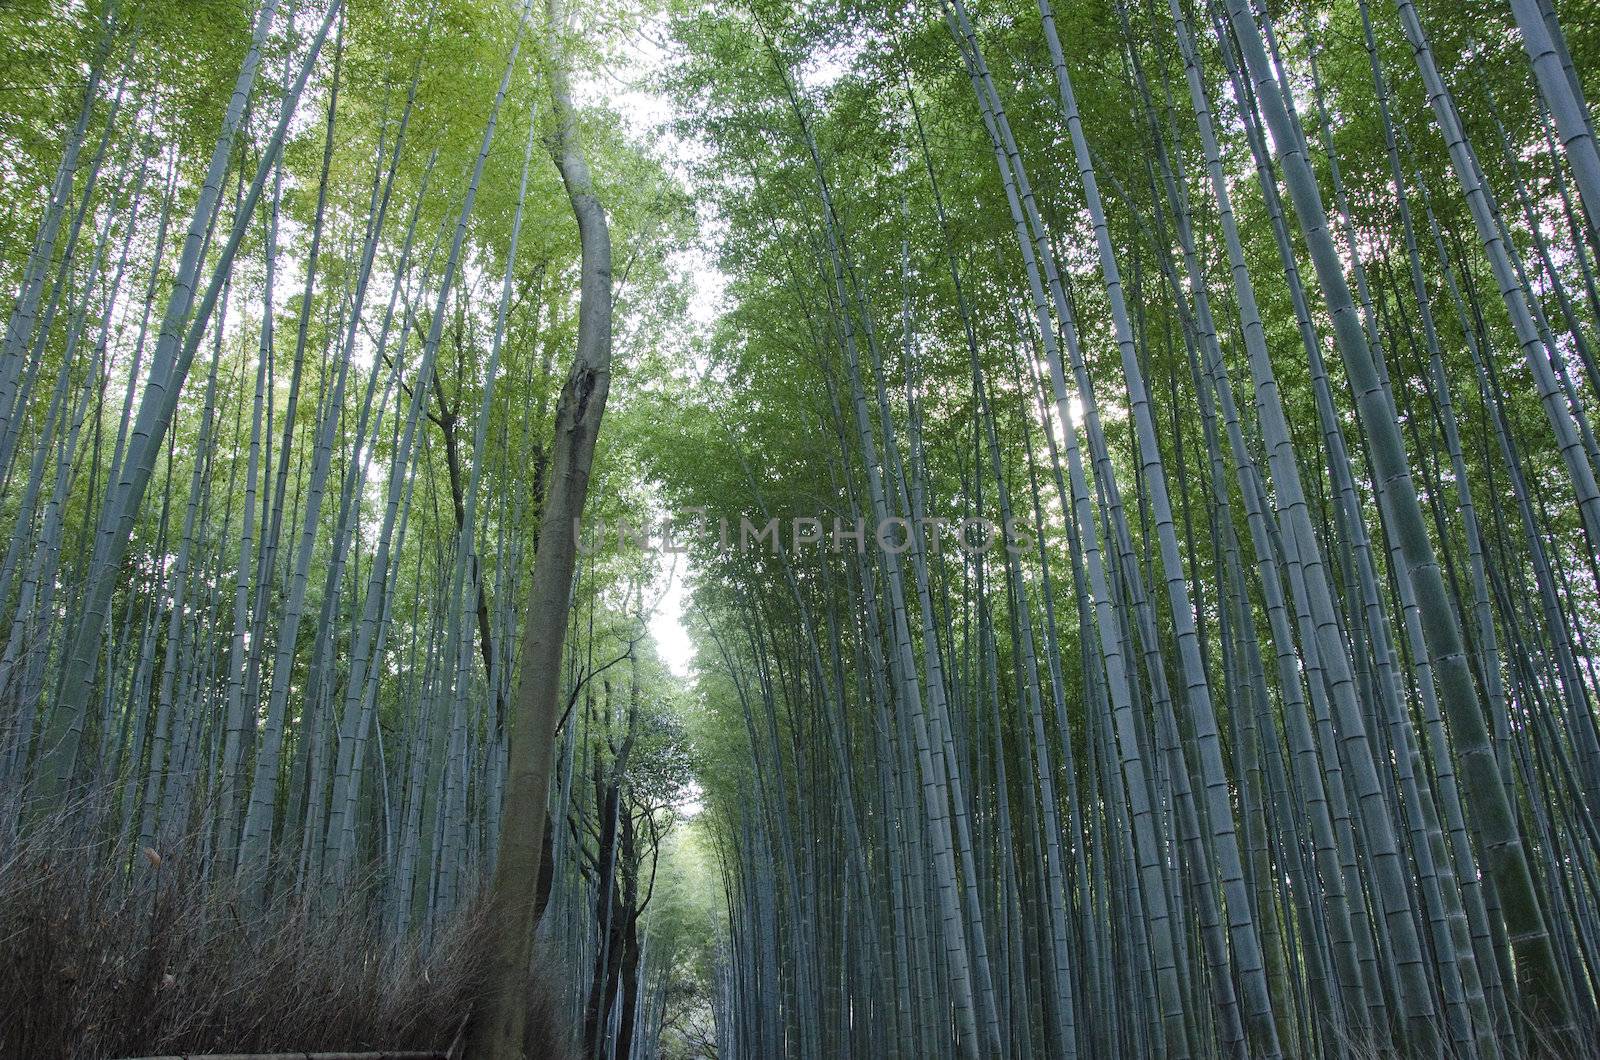 Background of green japanese bamboo stems in a  forest seen from the side